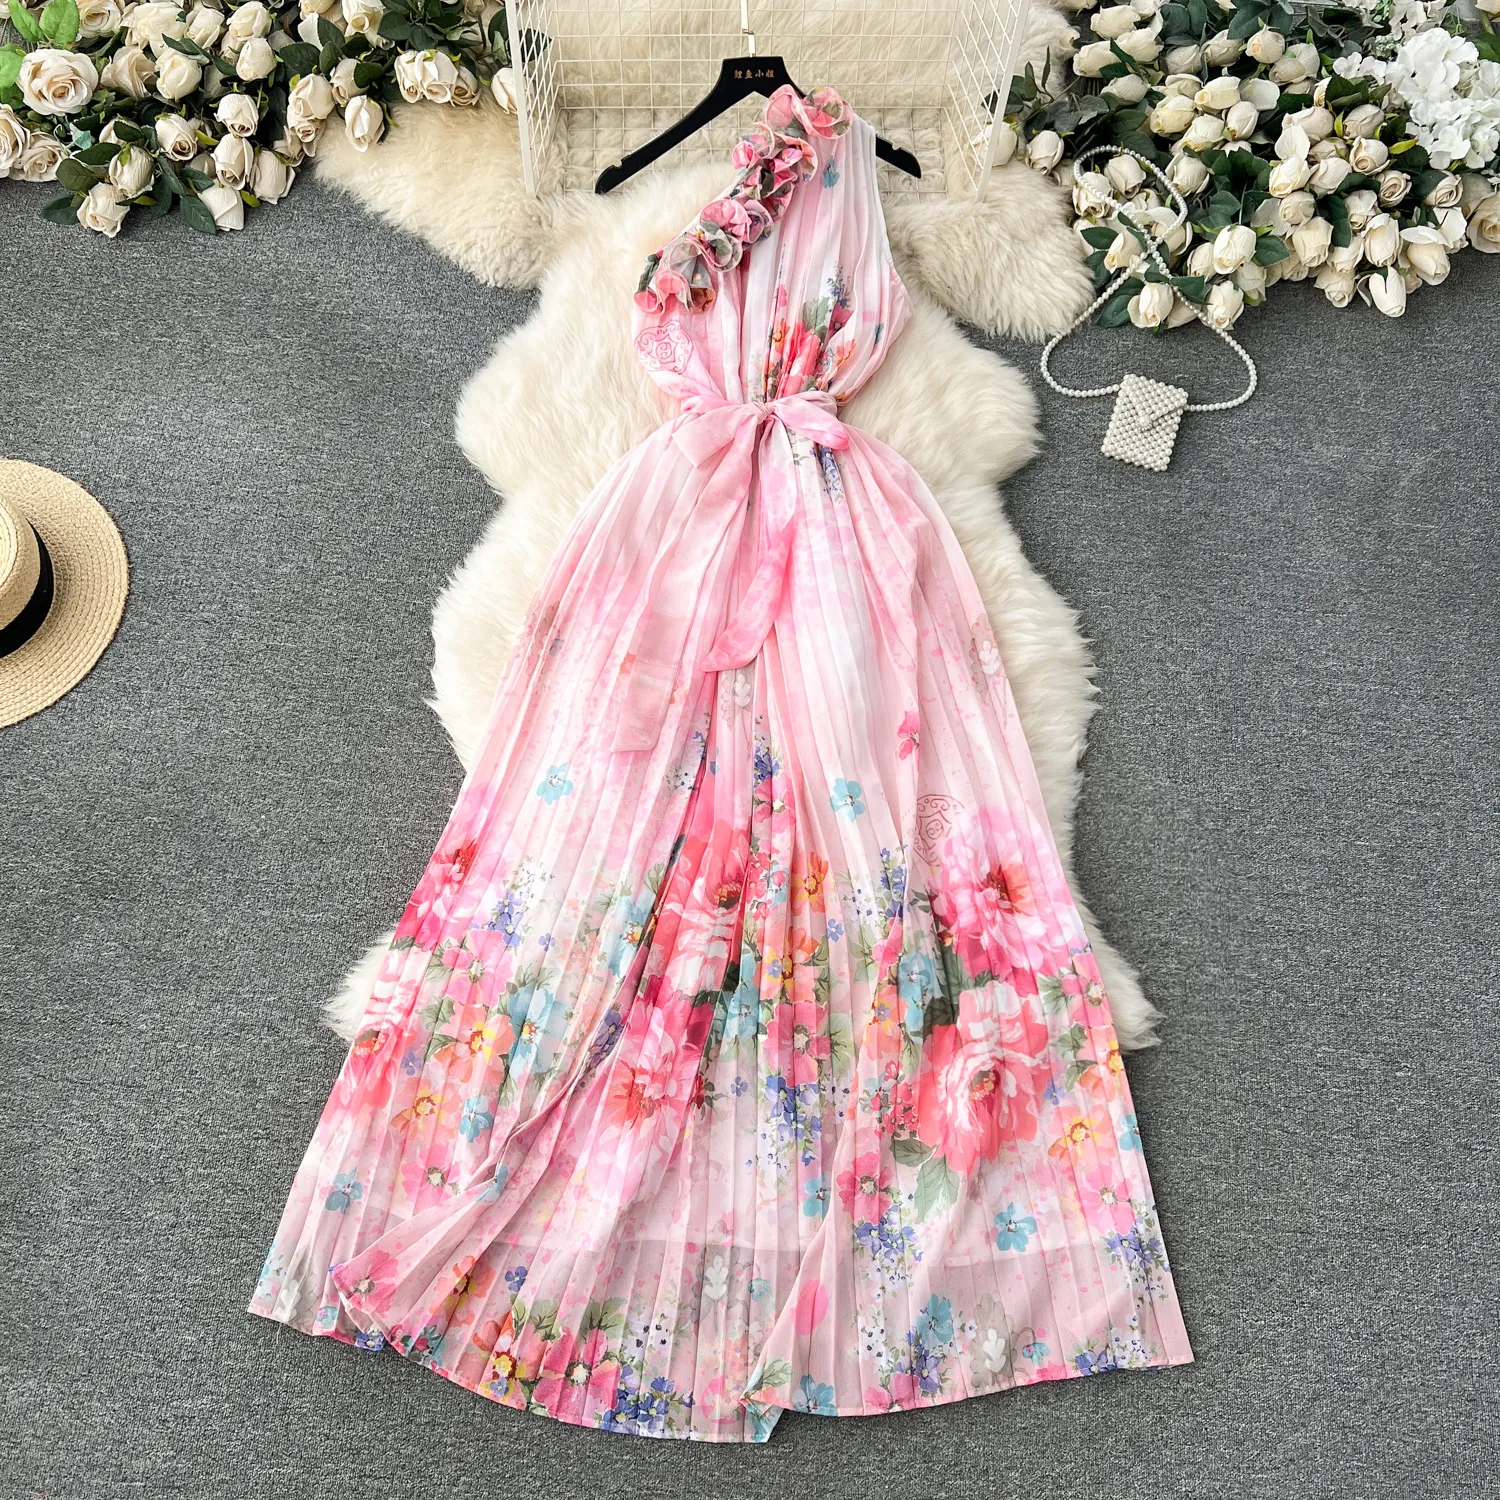 Fanhua series holiday dress for women, niche three-dimensional ruffle edge diagonal collar off shoulder slim fit long printed pleated dress